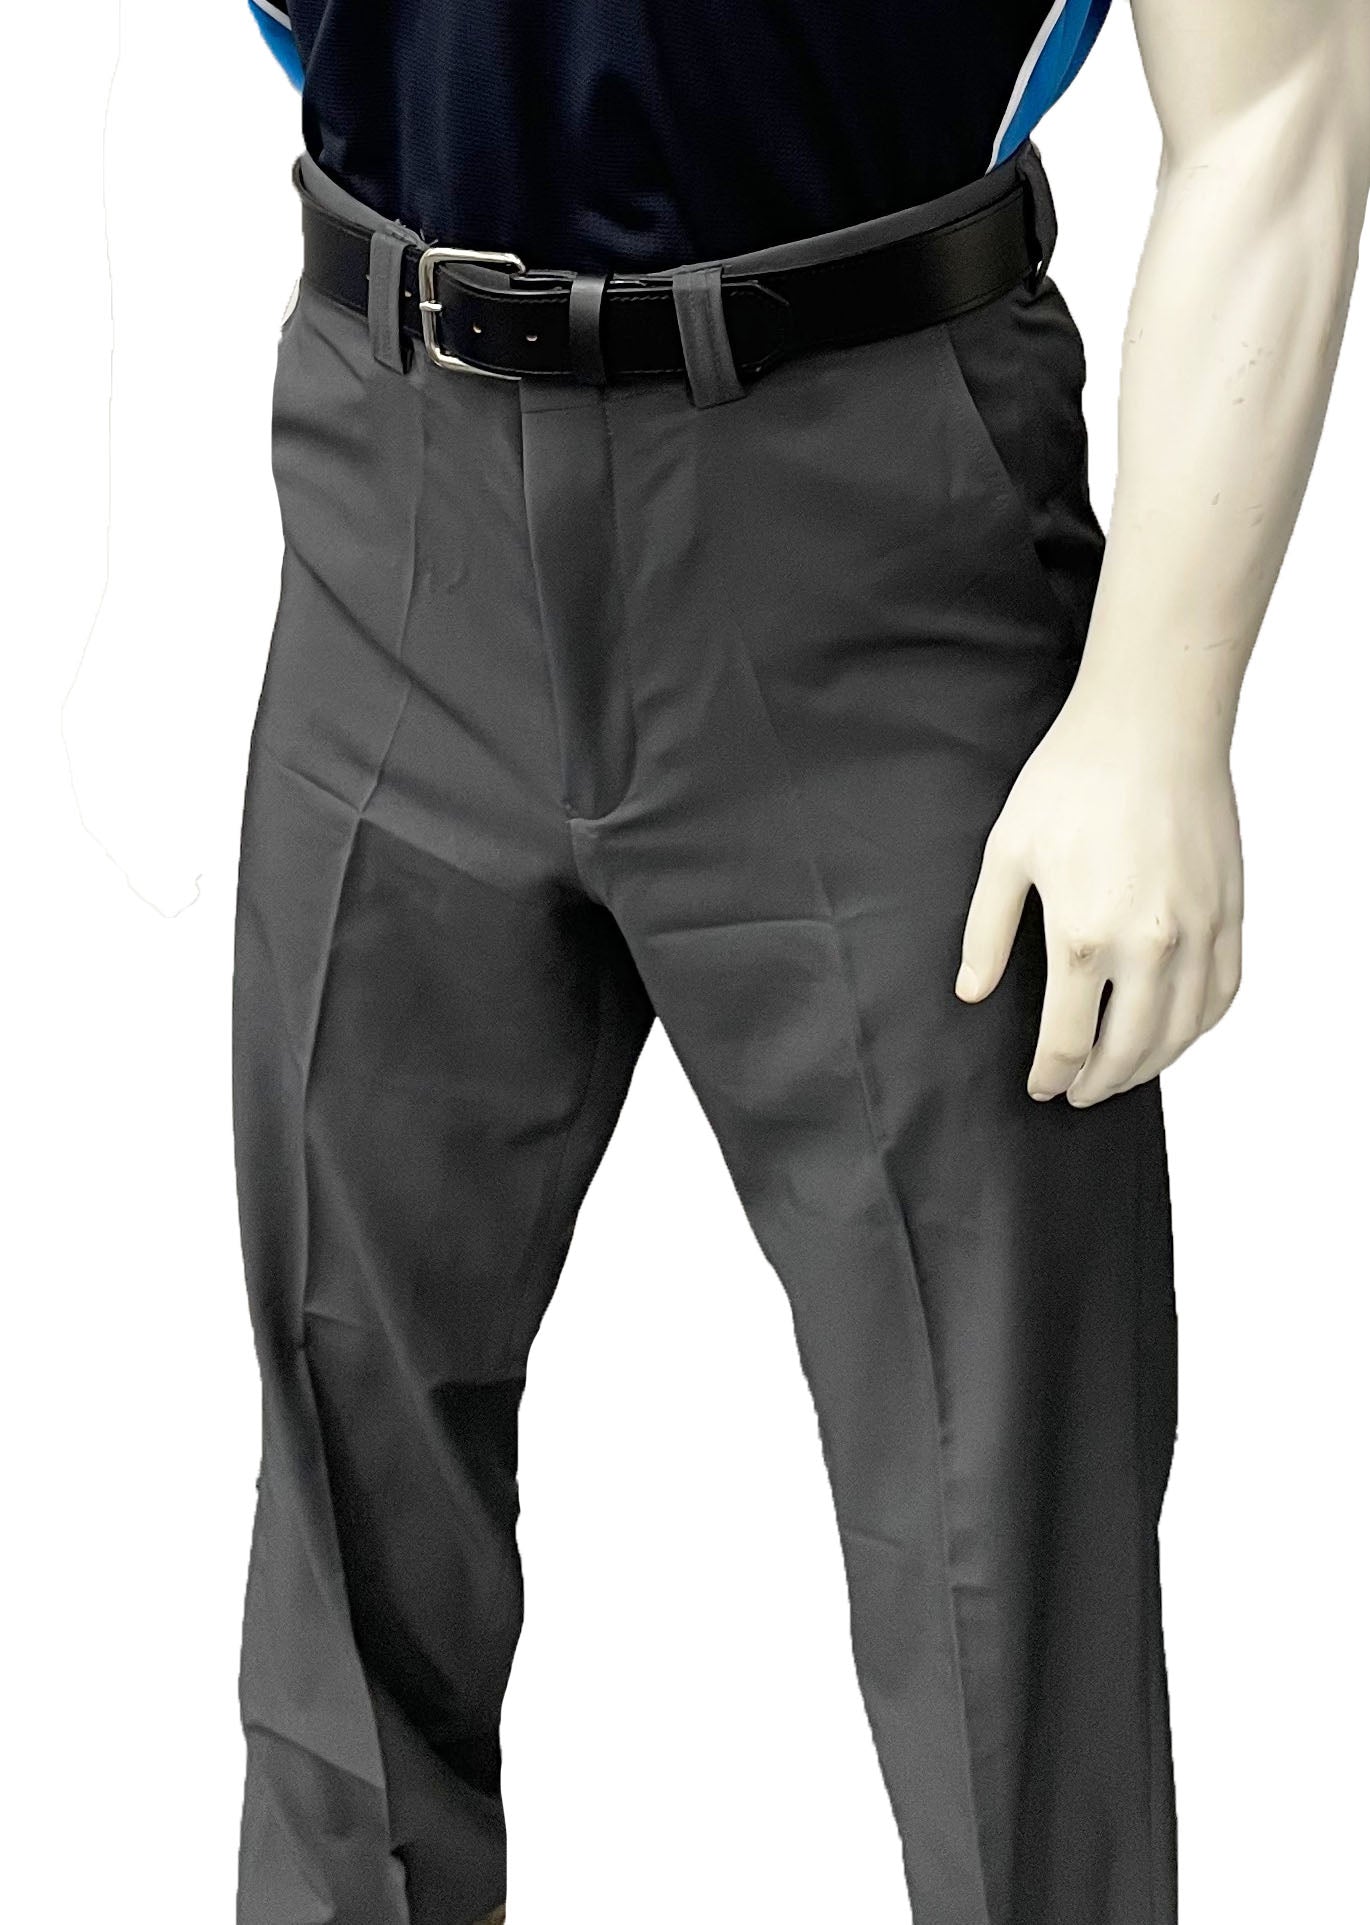 BBS357CH- "NEW" Men's Smitty "4-Way Stretch" FLAT FRONT COMBO PANTS with SLASH POCKETS "EXPANDER WAISTBAND"- Charcoal Grey